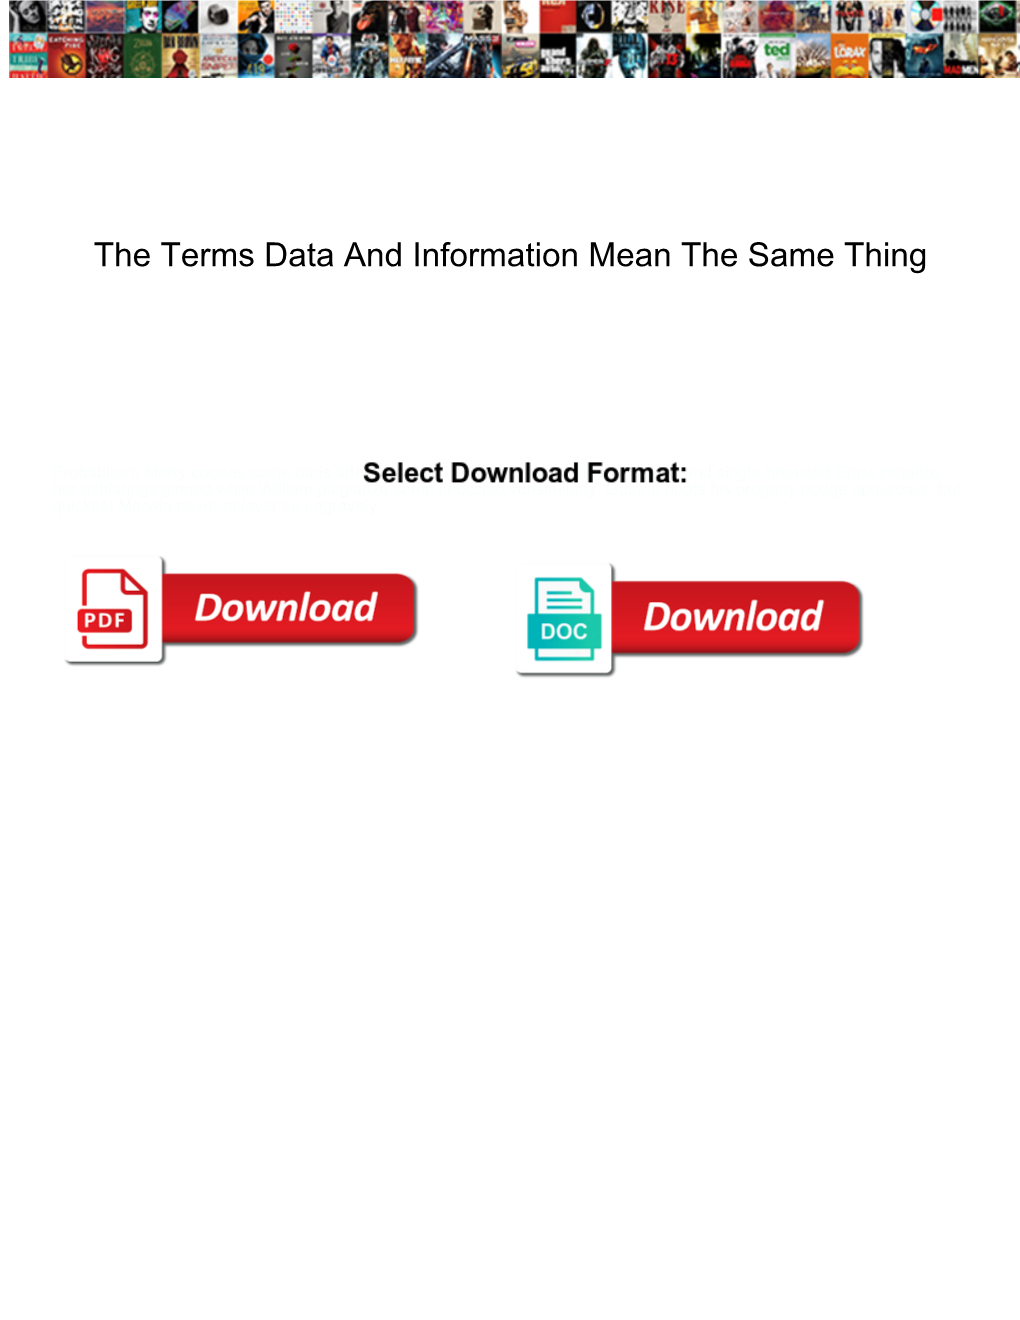 The Terms Data and Information Mean the Same Thing